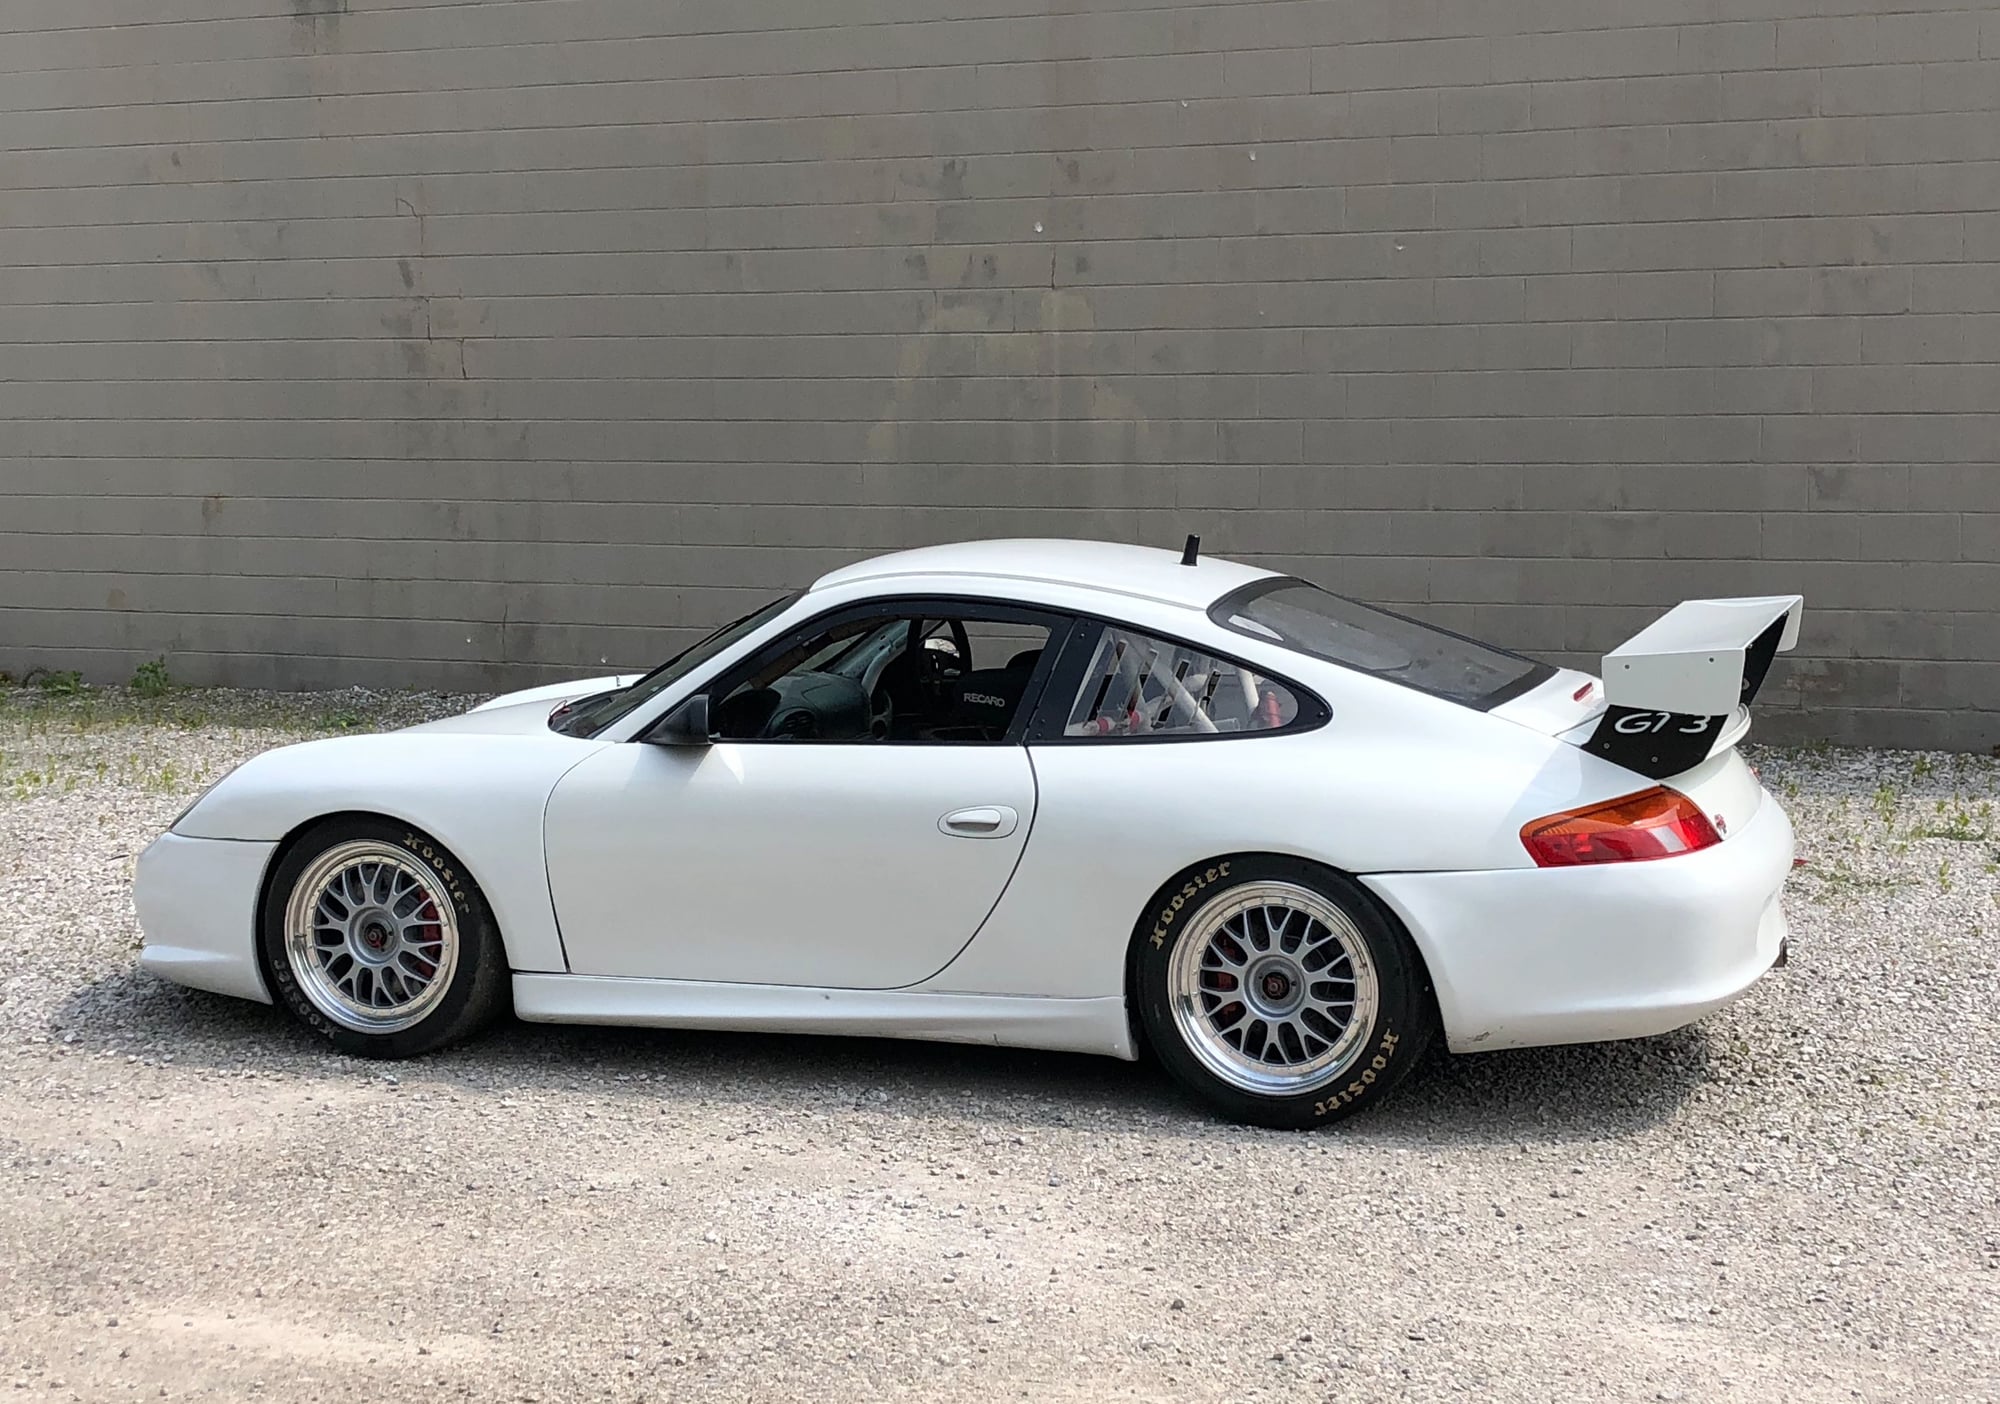 2003 Porsche 911 - 2003 Porsche 996 GT3 Cup - Used - VIN 12345679901234567 - 6 cyl - 2WD - Manual - Coupe - White - Bay Village, OH 44140, United States